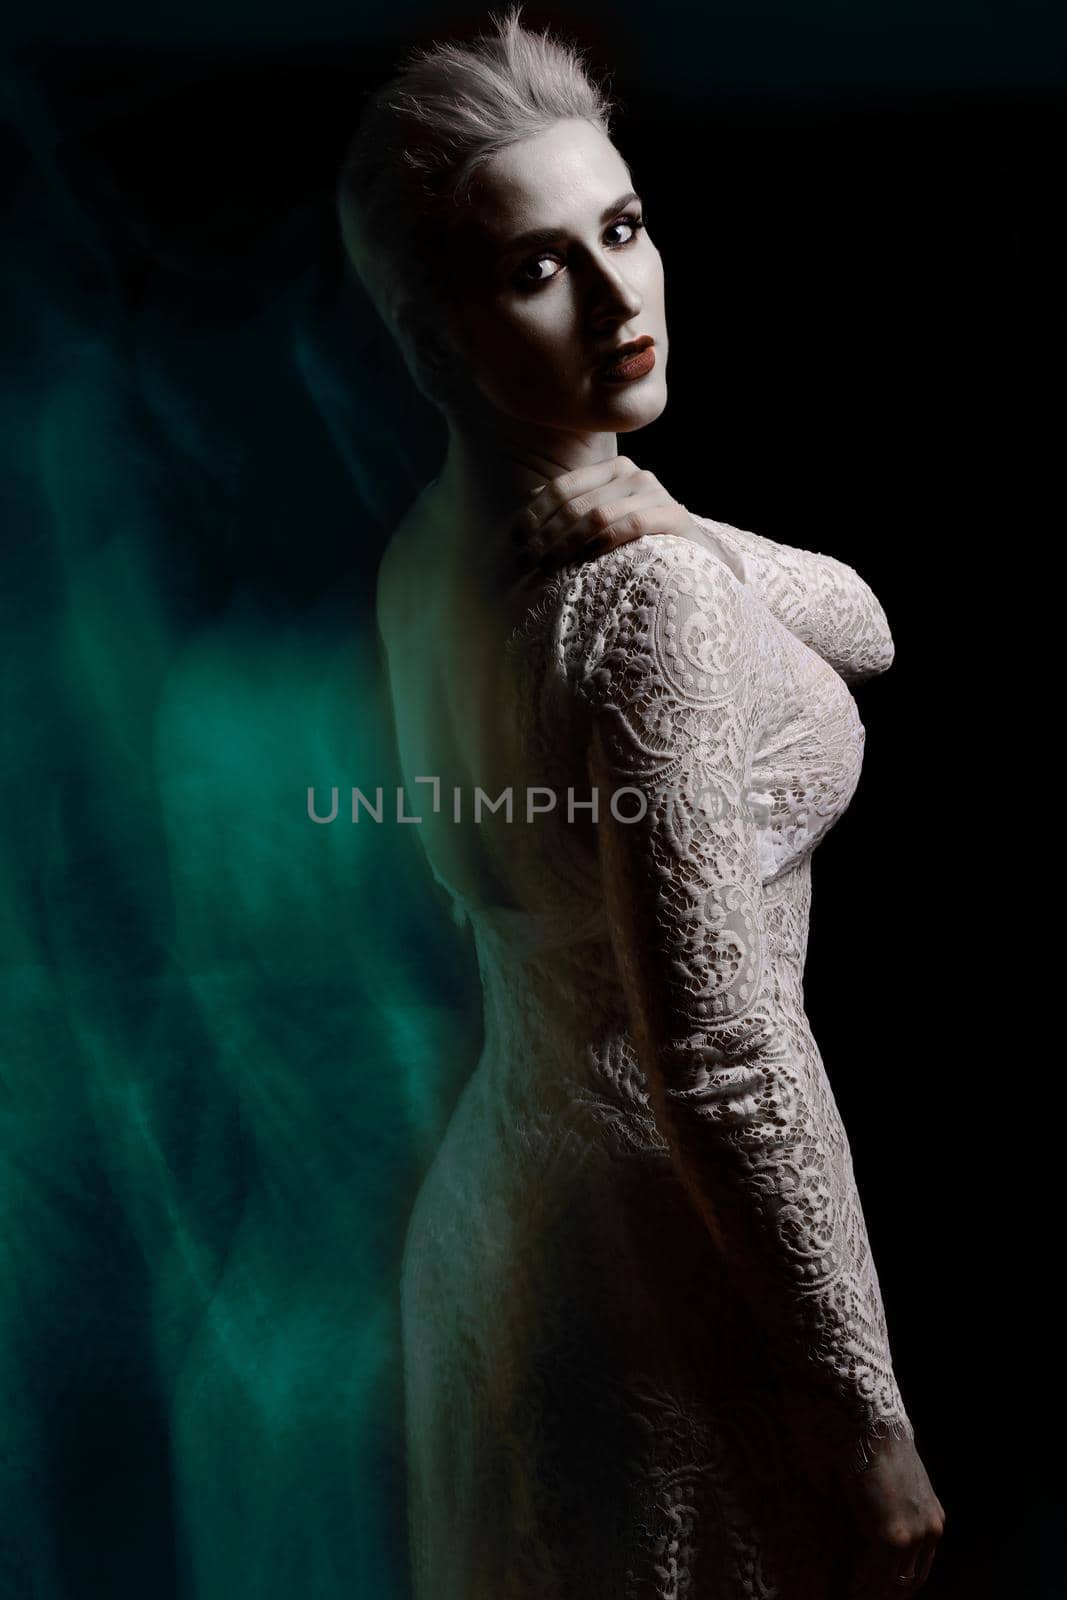 Beautiful girl in white lace negligee. The Snow Queen. by zartarn